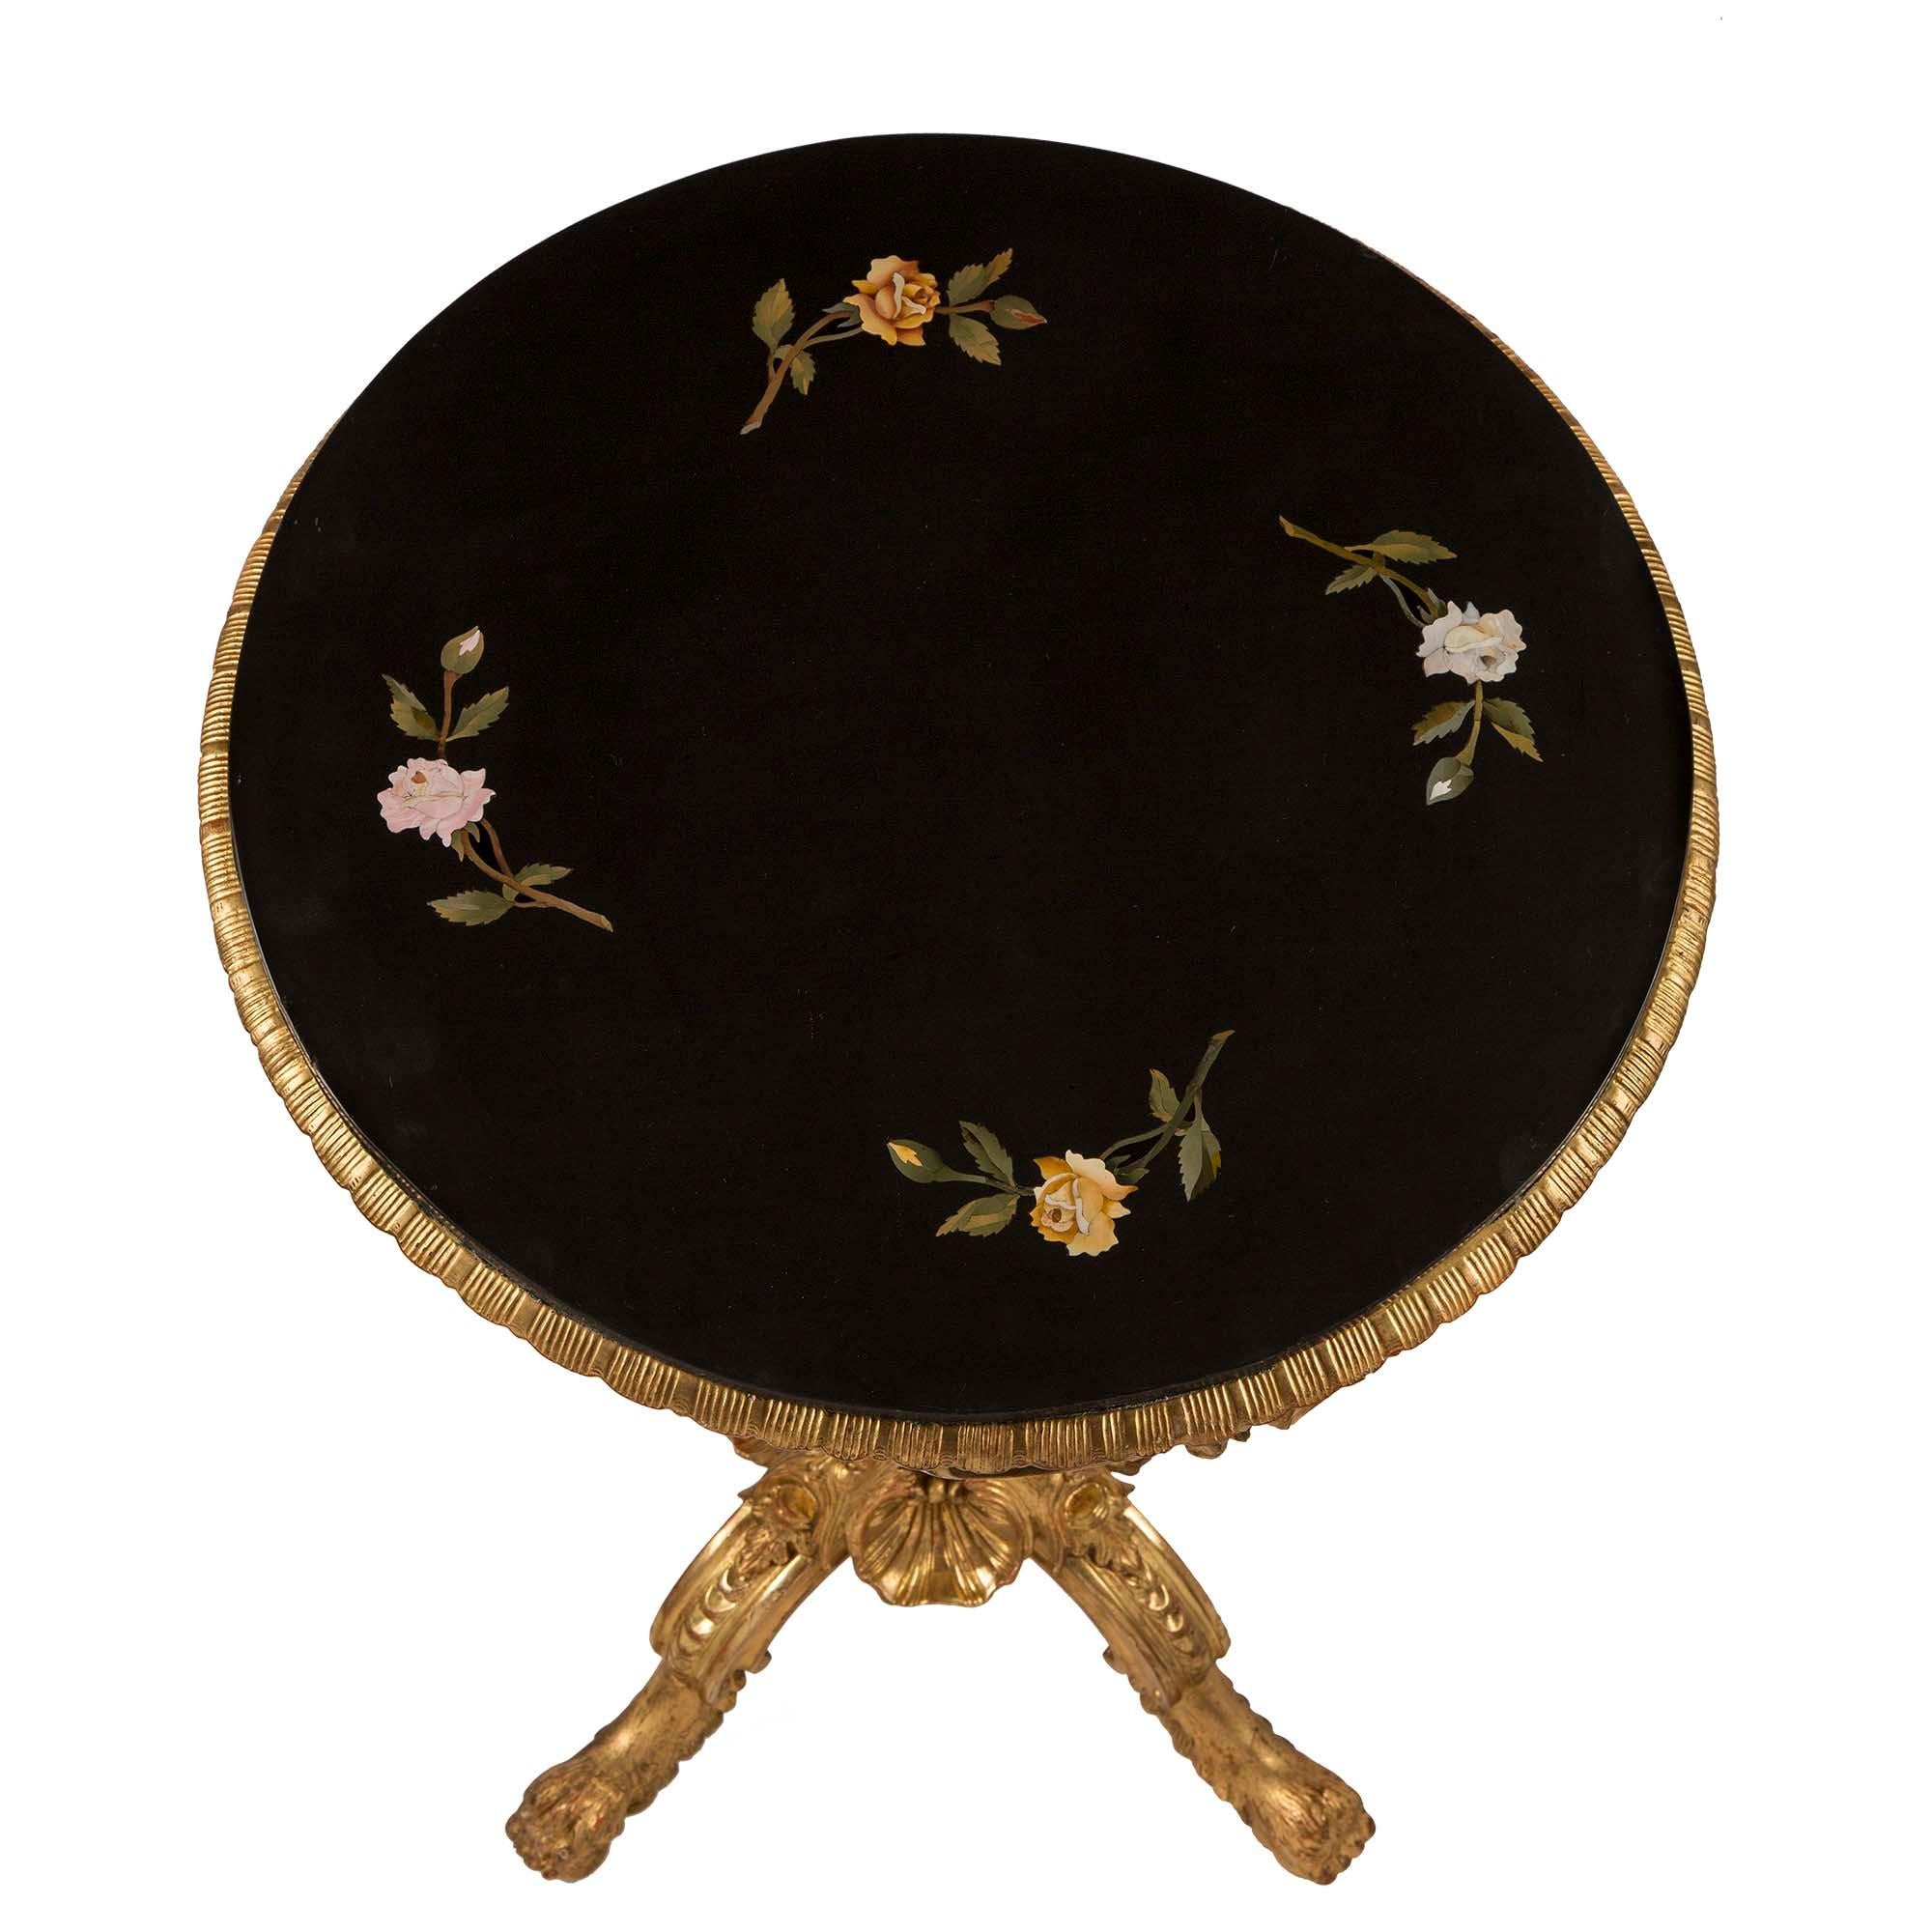 A lovely Italian 19th century giltwood and Pietra Dura marble side table. The table is raised on four scrolled legs with paw designs. At the base are large theatrical masks below the central fut. The table frieze has a reeded design accented with